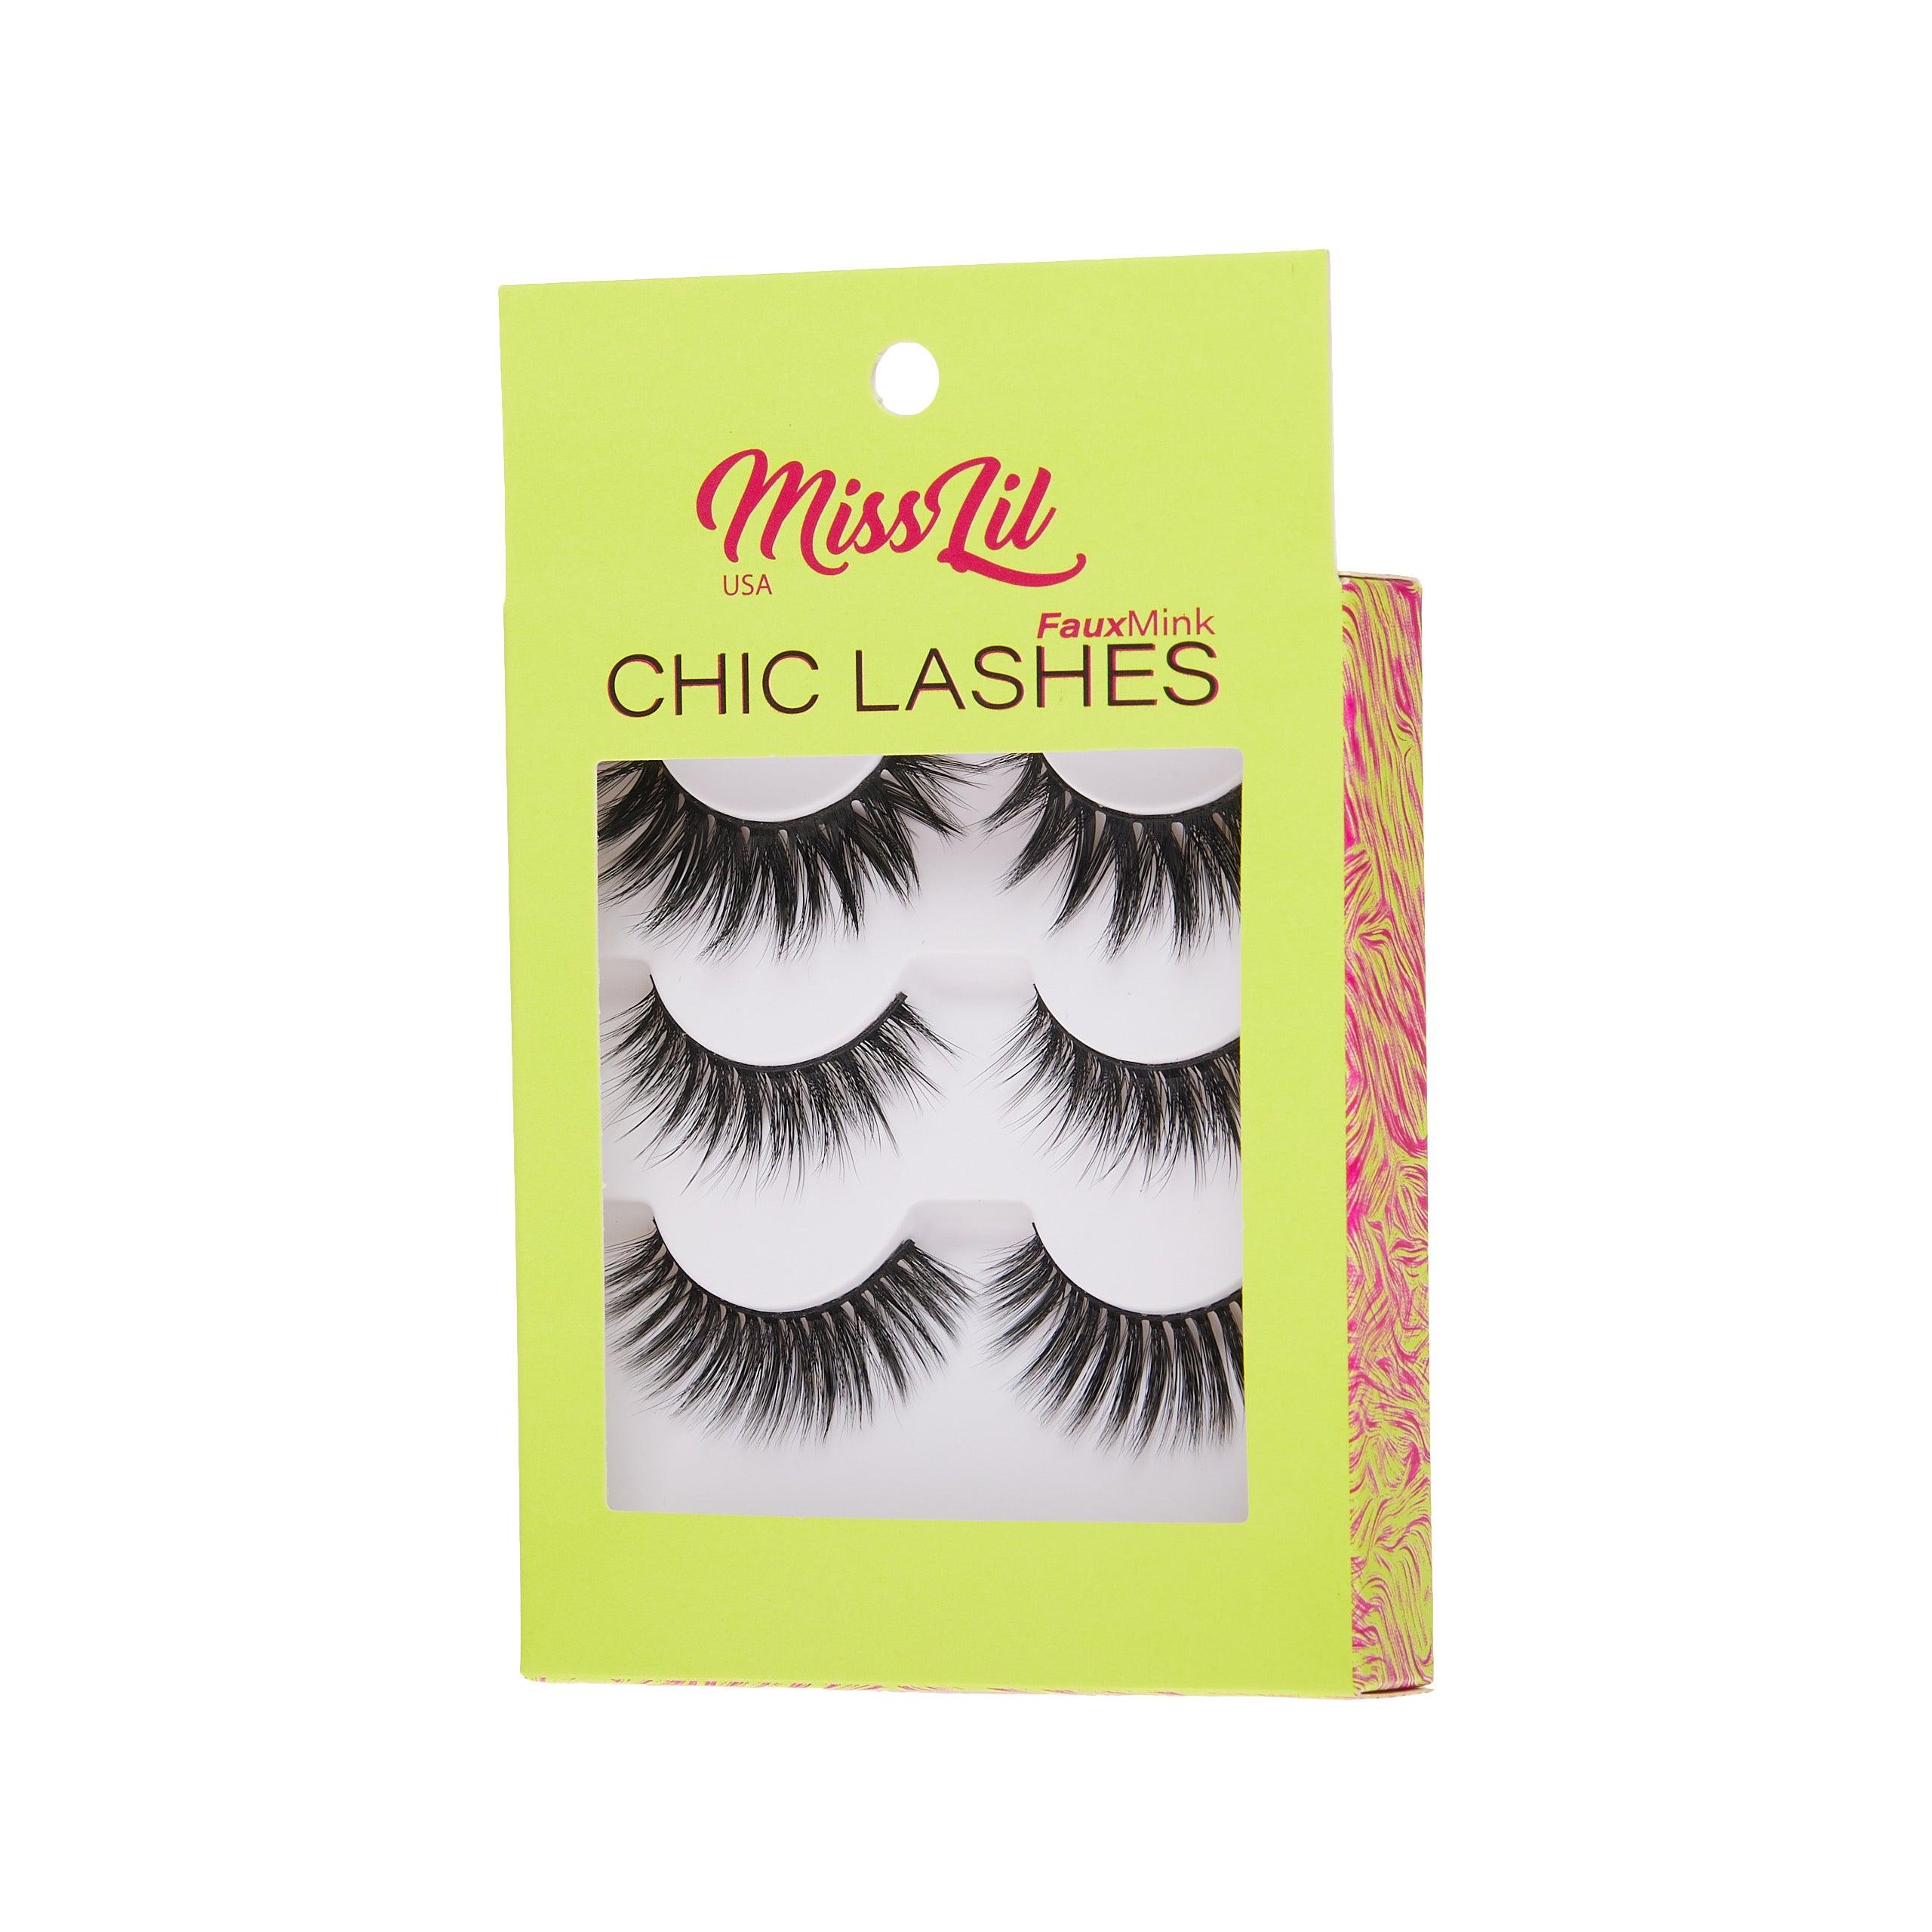 3-Pair Faux Mink Eyelashes - Chic Lashes Collection #35 - Pack of 3 - Miss Lil USA